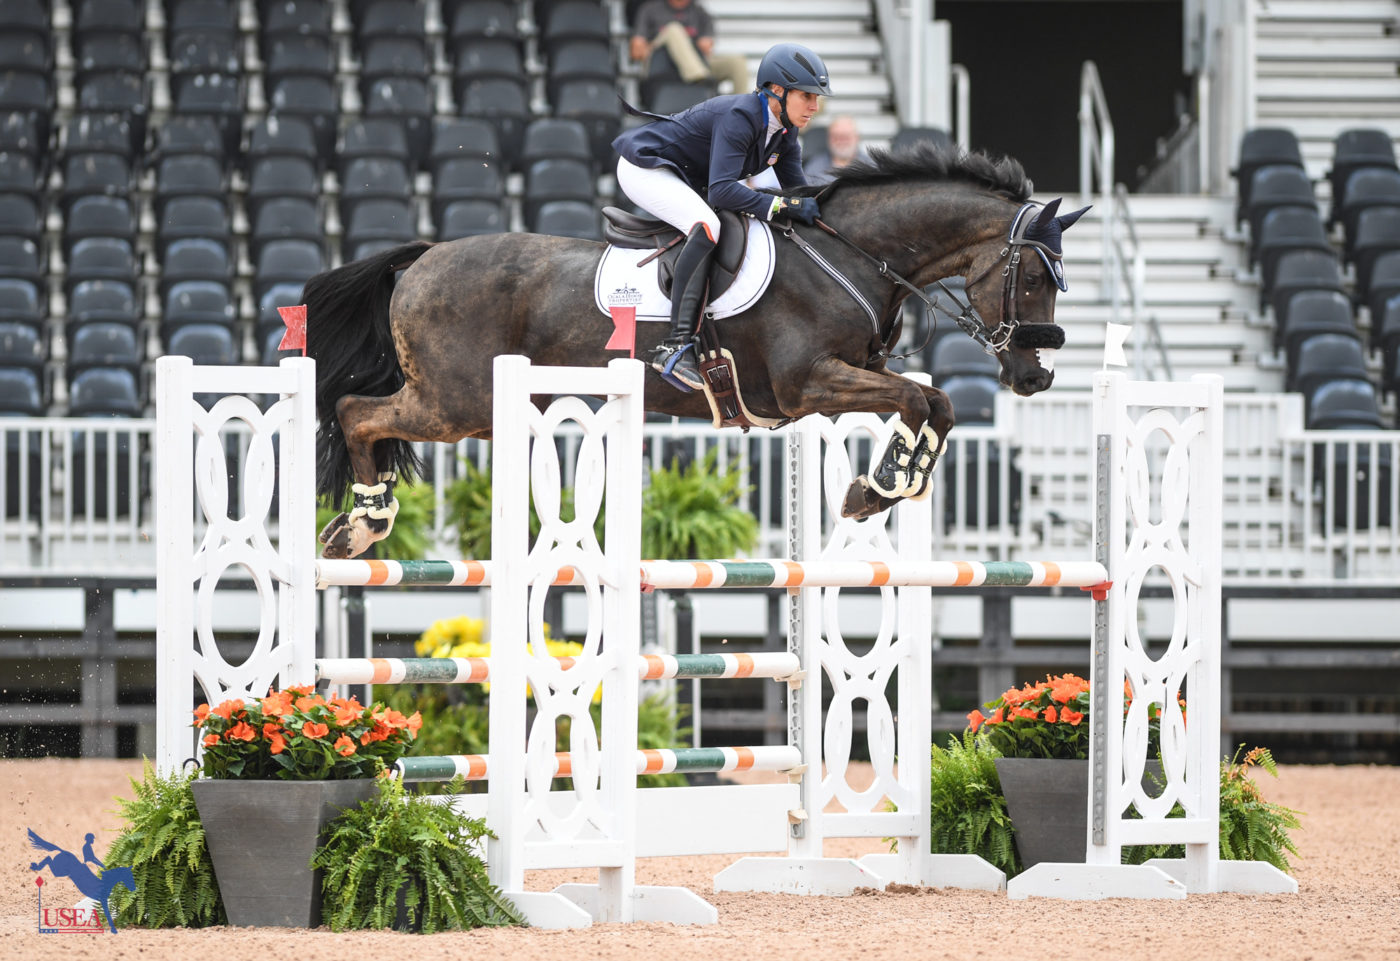 Liz Halliday-Sharp and Cooley Moonshine are in a tie for third in the CCI4*-S. USEA/Lindsay Berreth photo